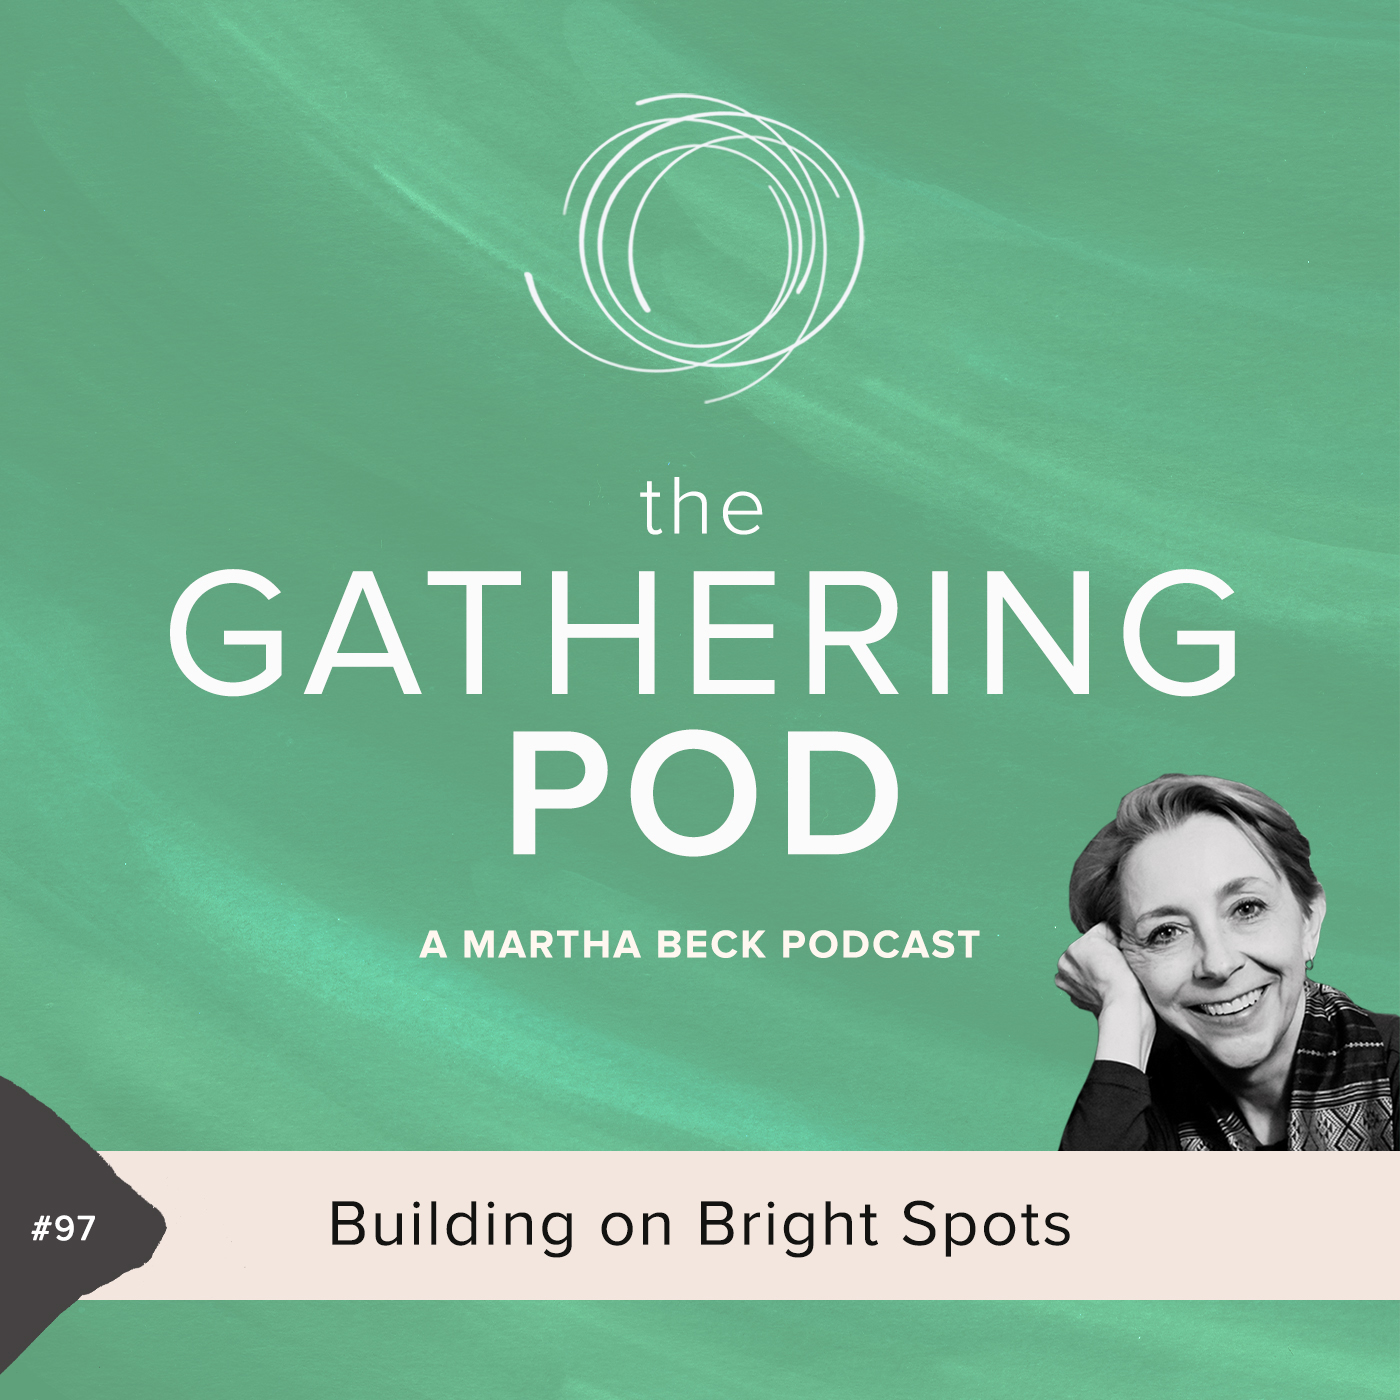 Image for The Gathering Pod A Martha Beck Podcast Episode #97 Building on Bright Spots